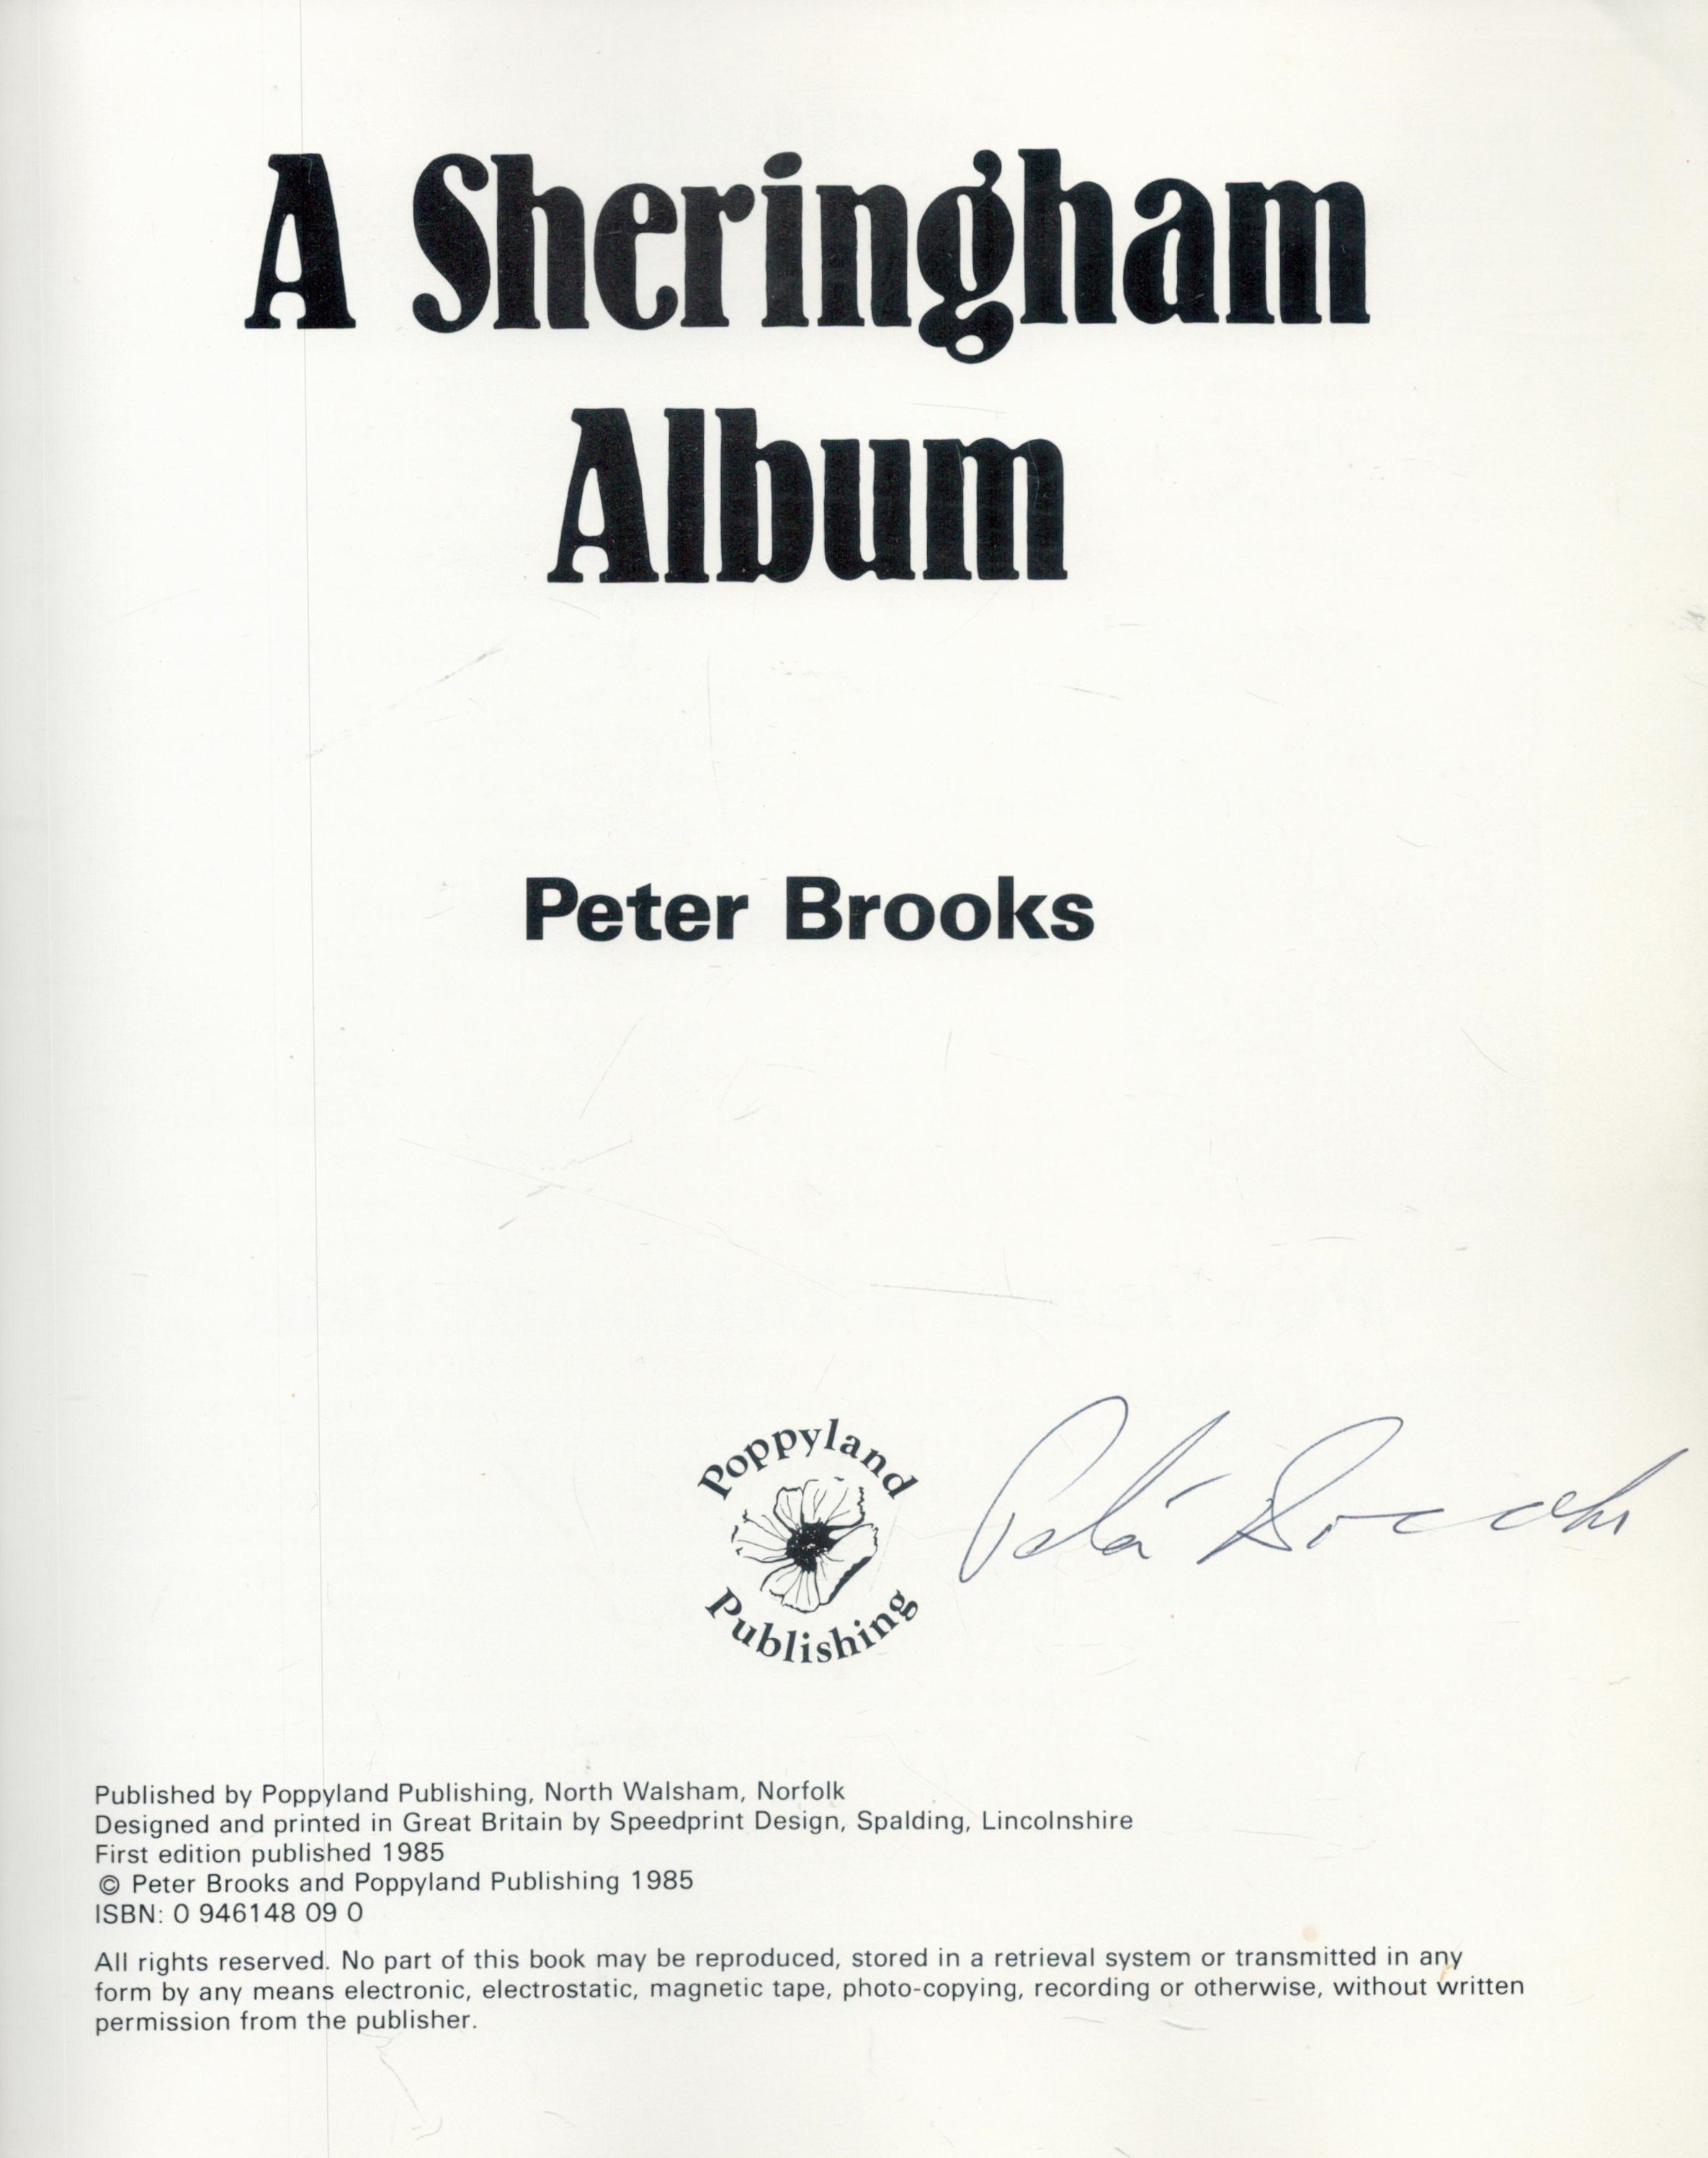 Peter Brooks Signed Book - A Sheringham Album by Peter Brooks 1985 First Edition Softback Book - Image 2 of 2